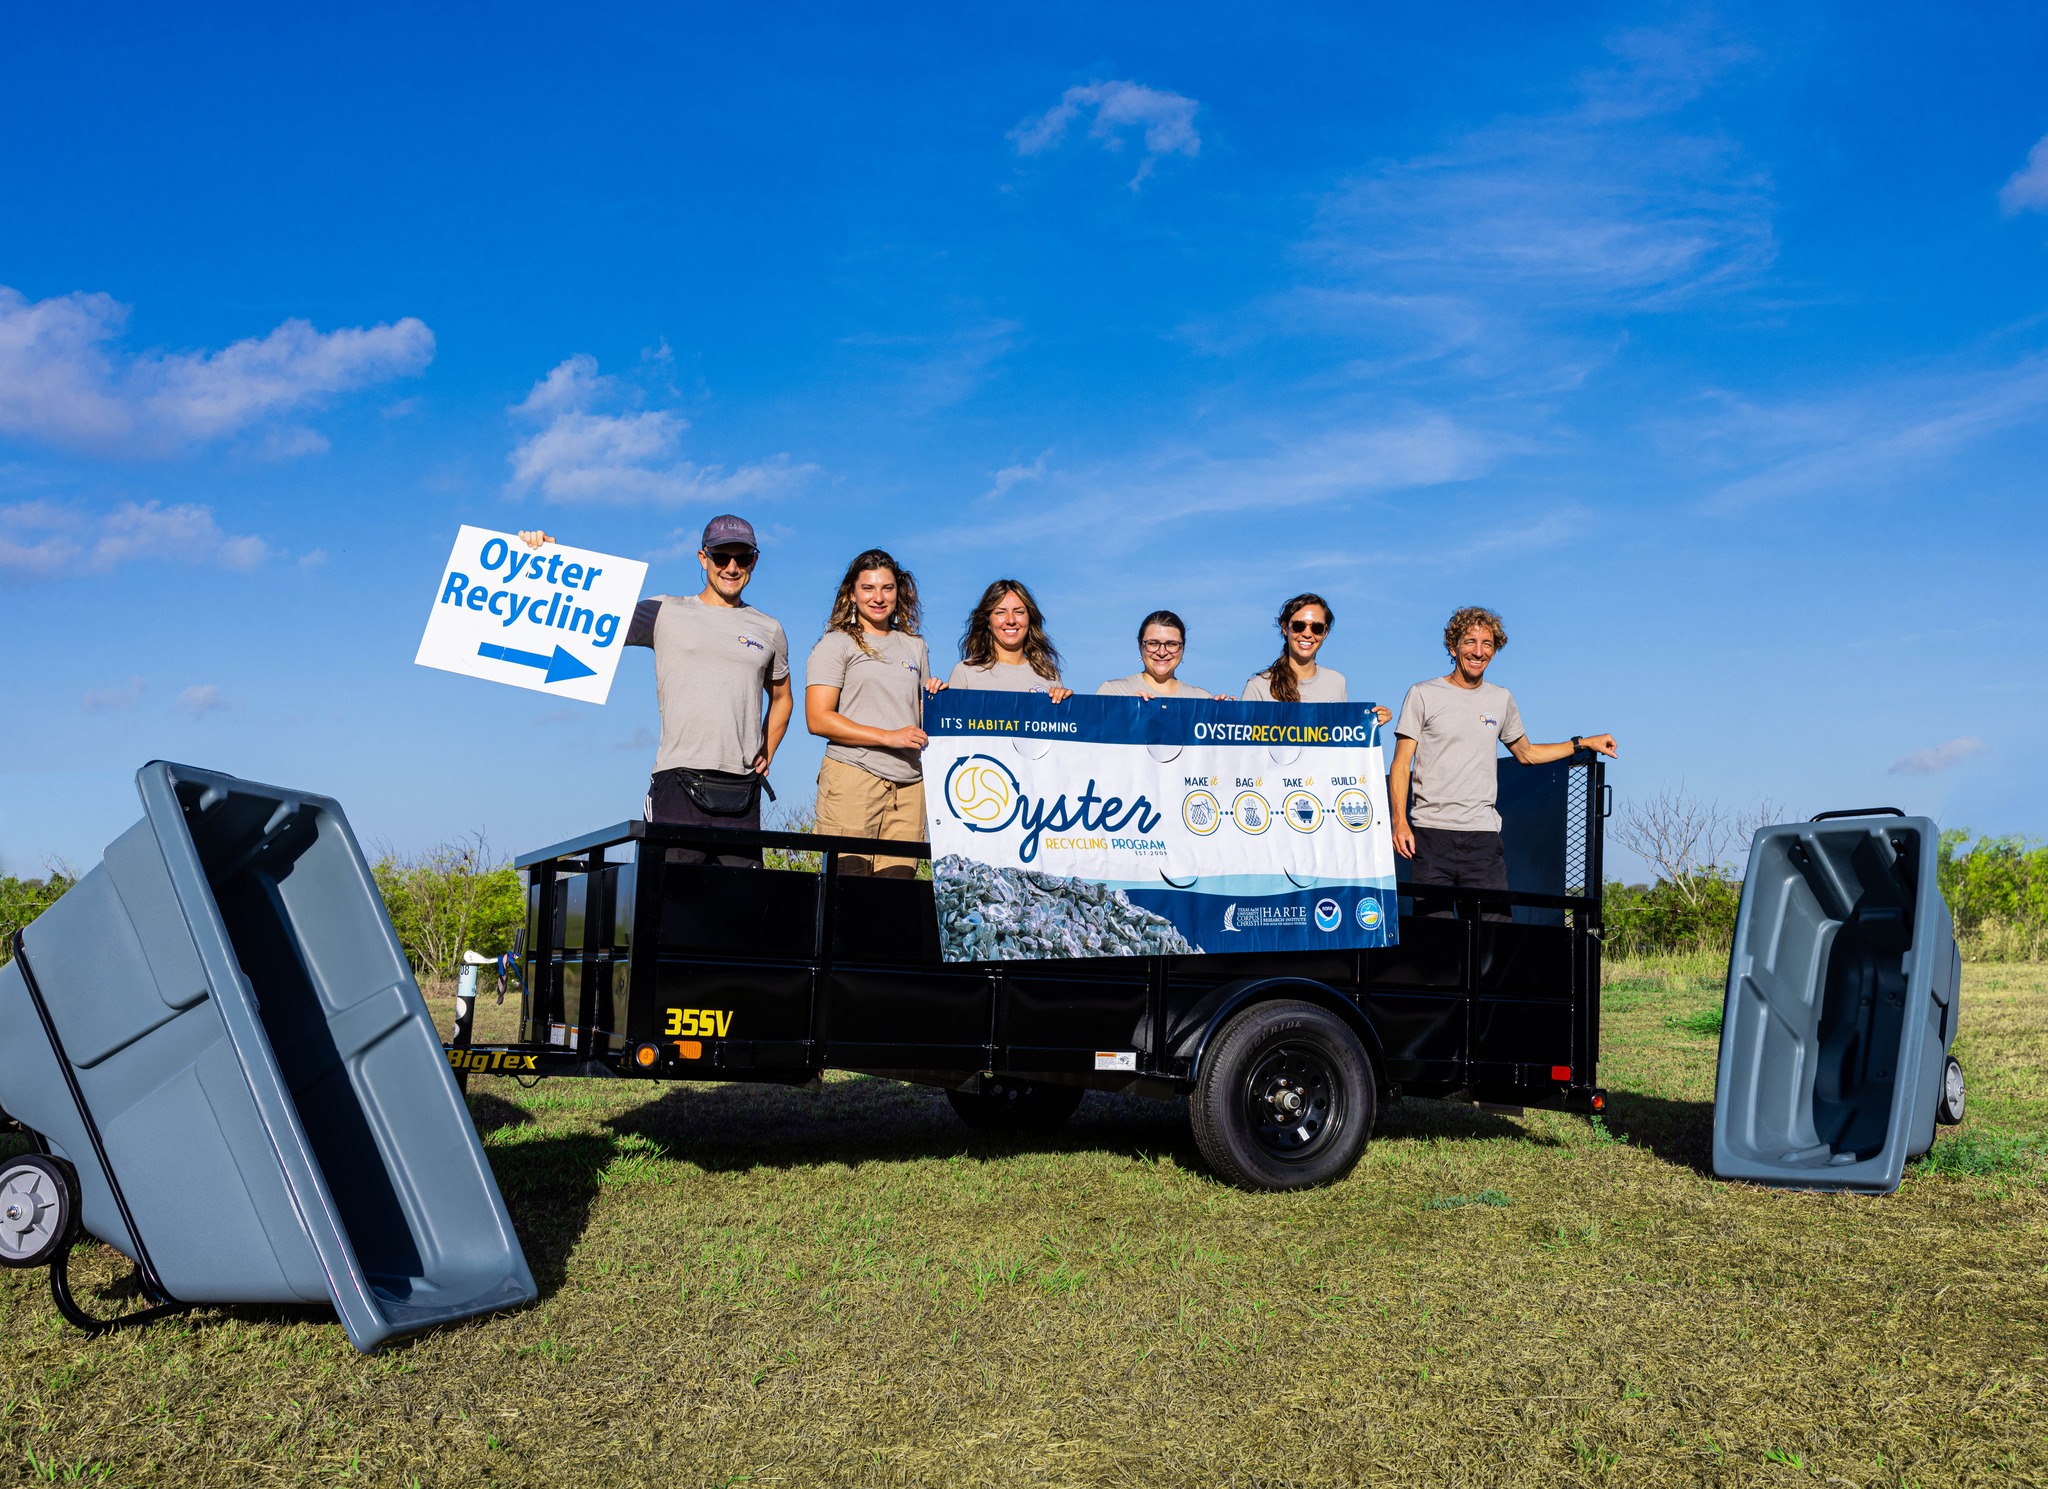 CCA Texas Funds $20,000 for Trailers in Oyster Recycling Efforts